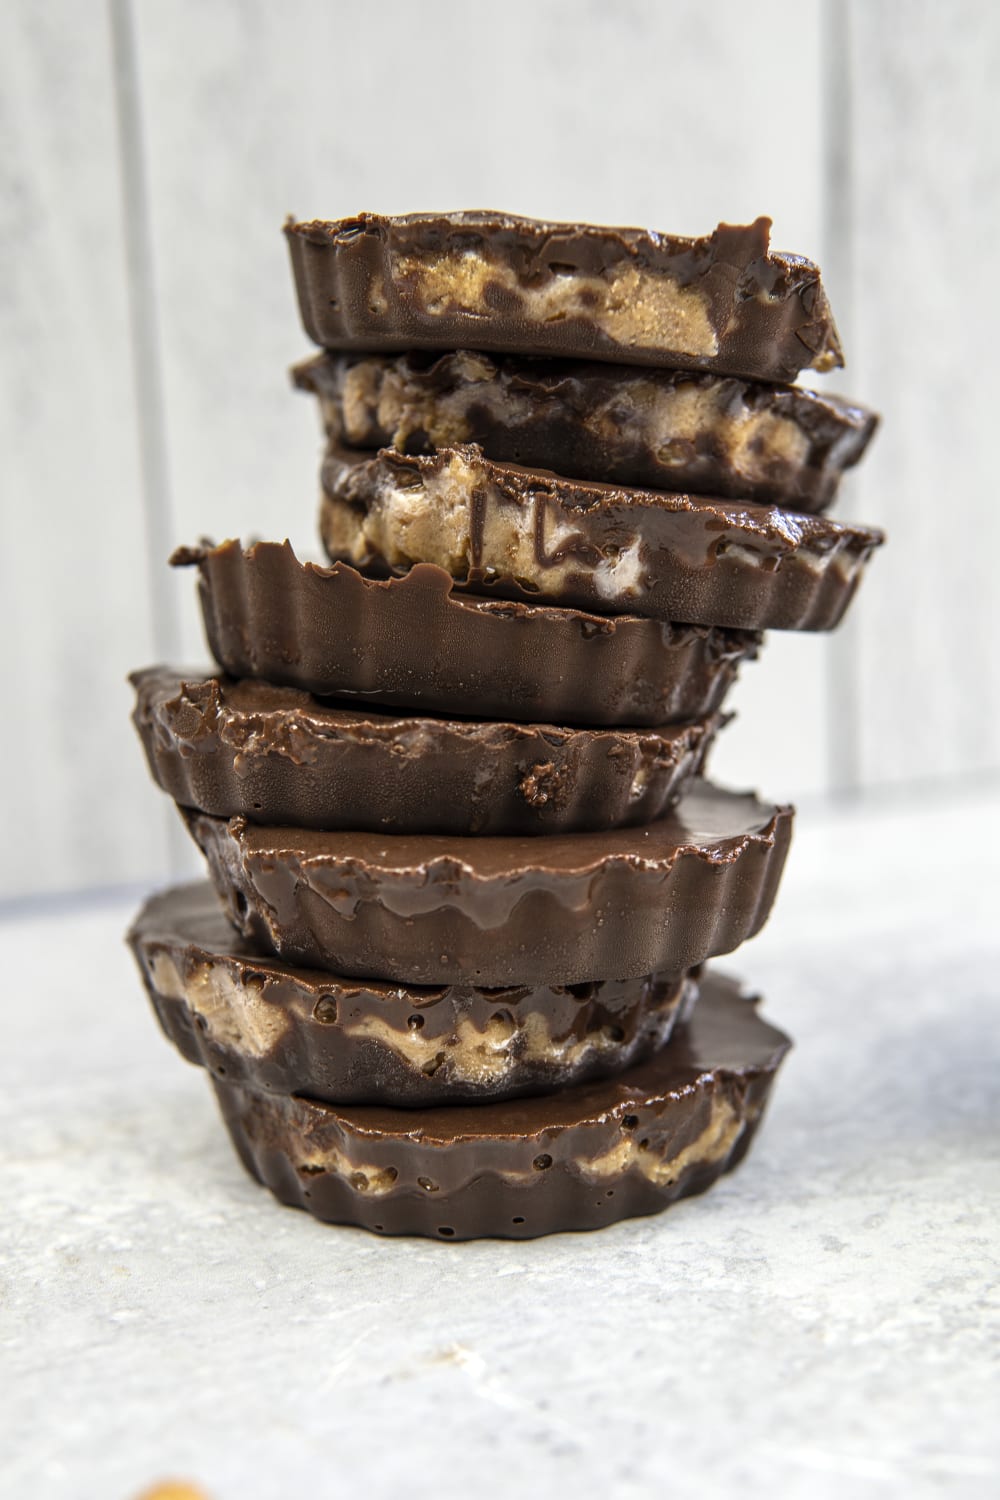 Homemade Peanut Butter Cups - No refined sugar & no added oil